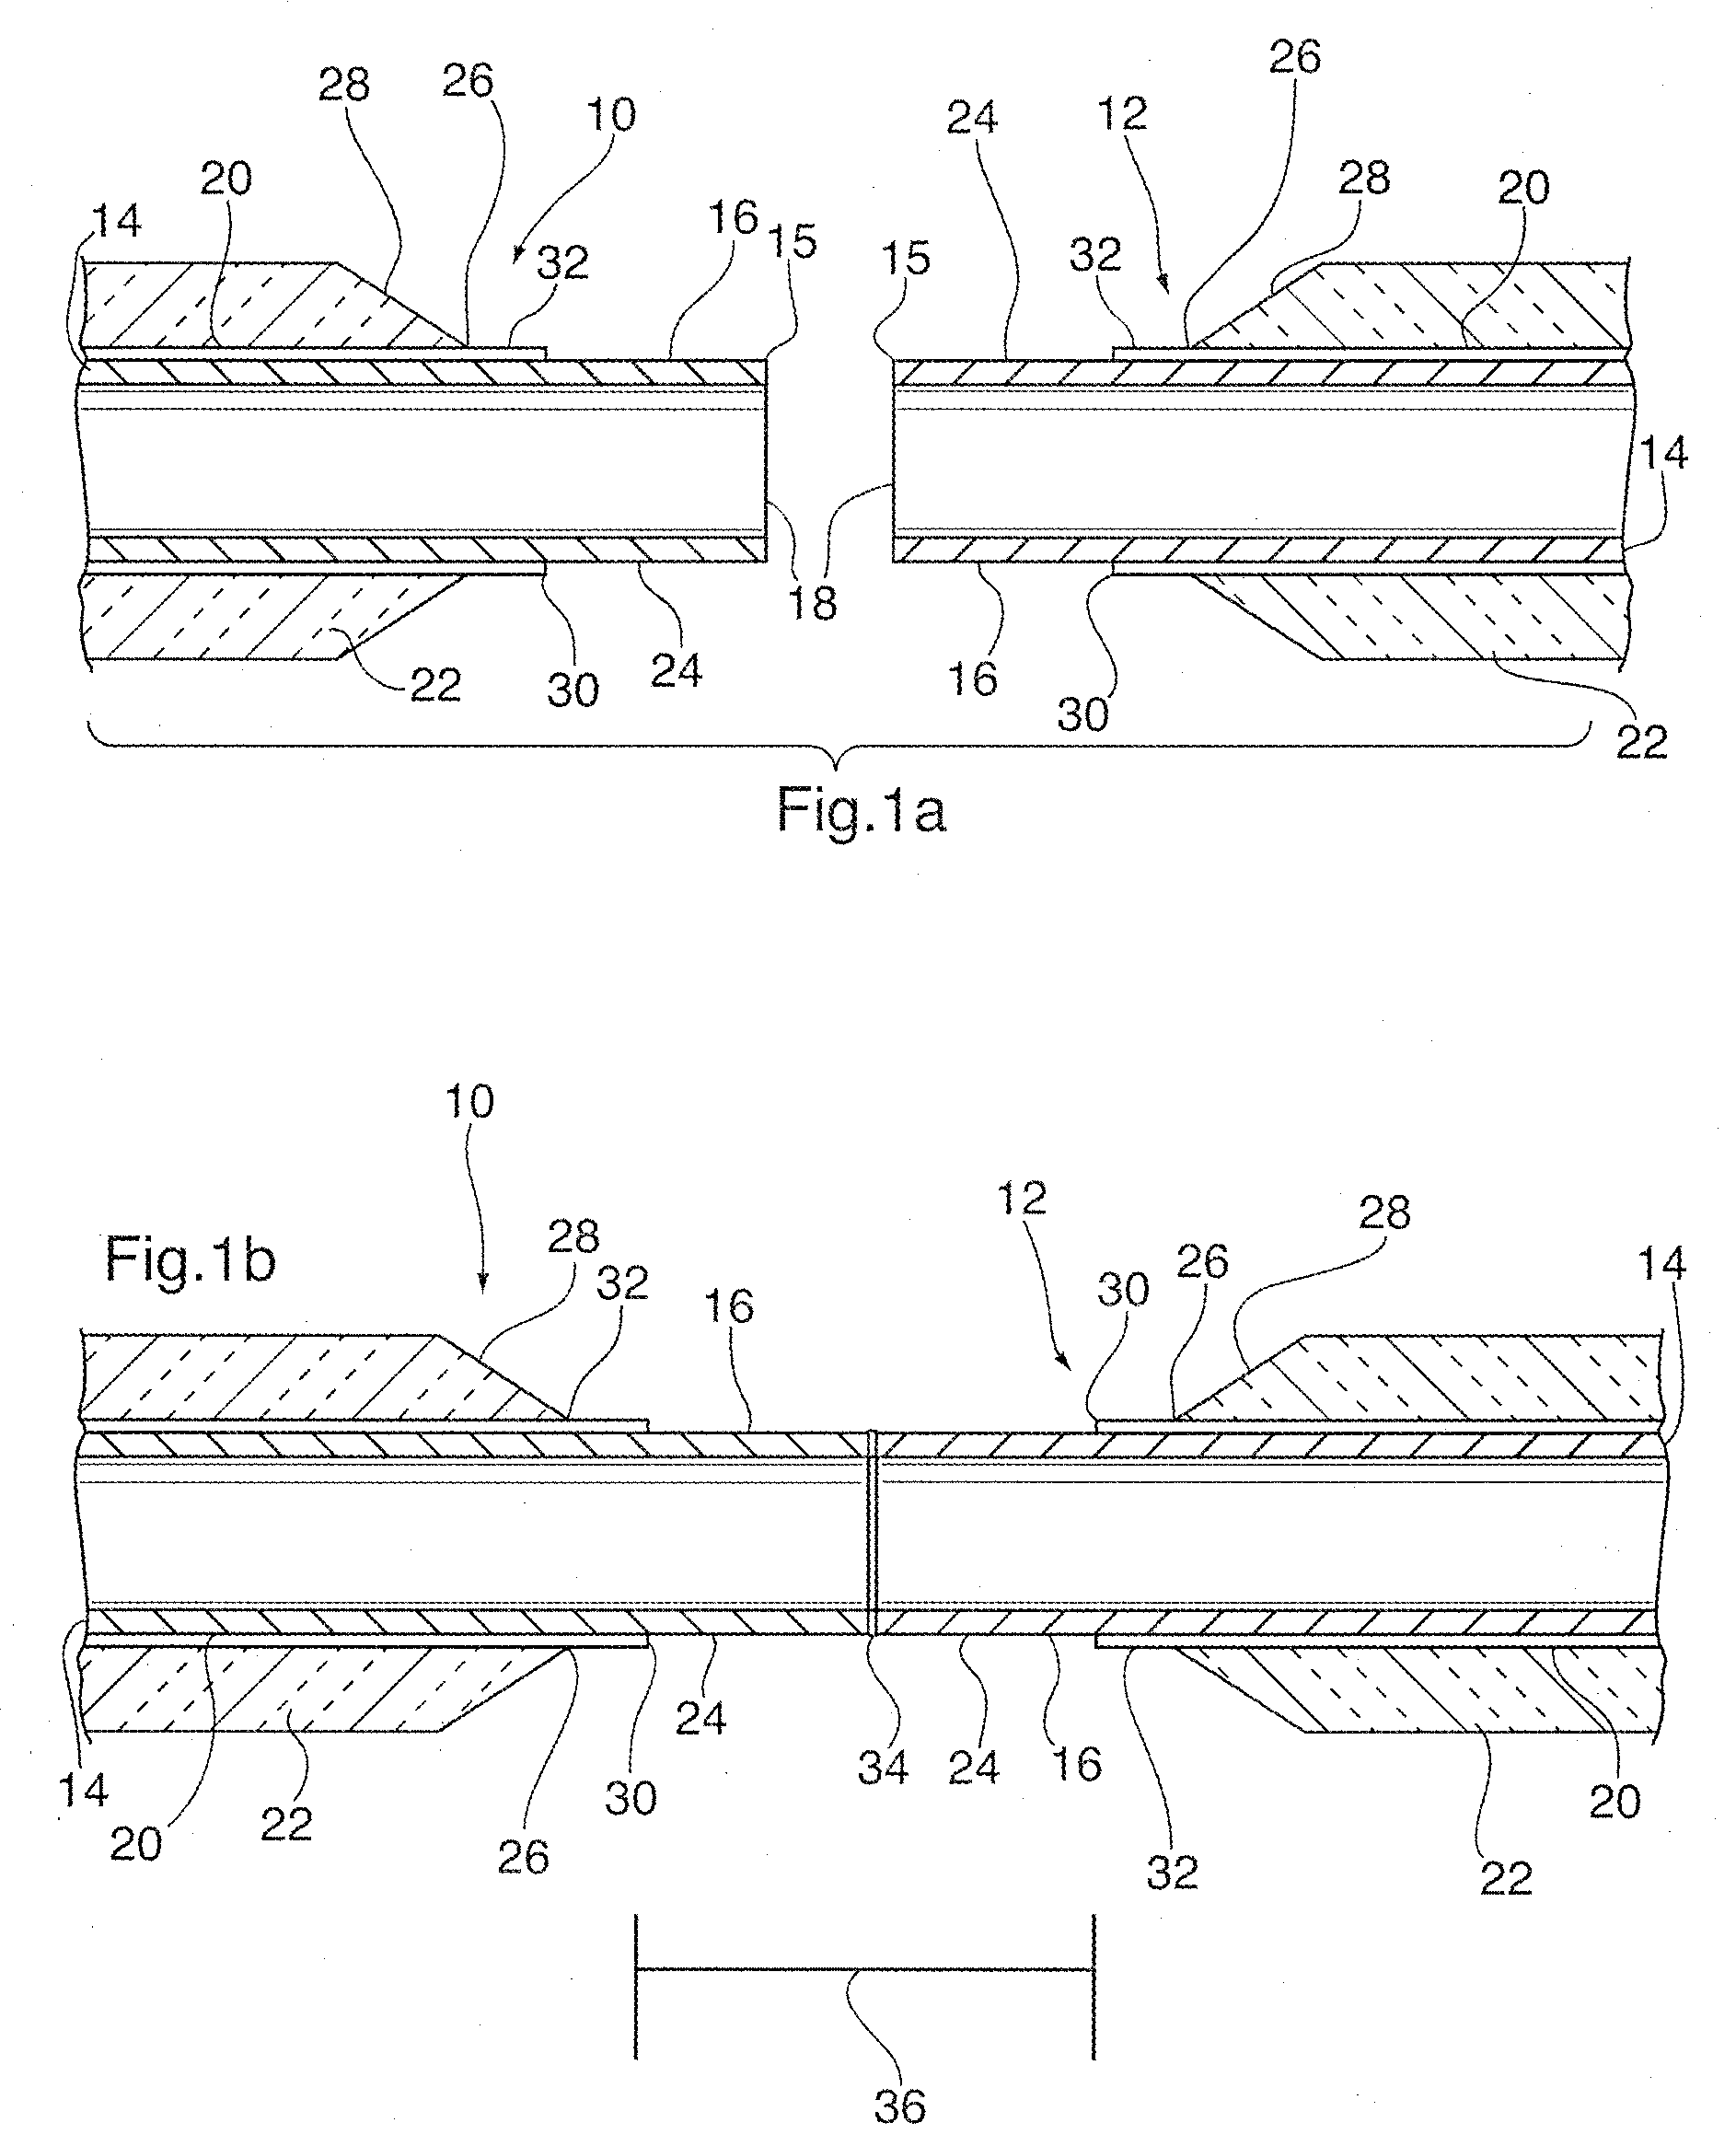 Low temperature method and system for forming field joints on undersea pipelines